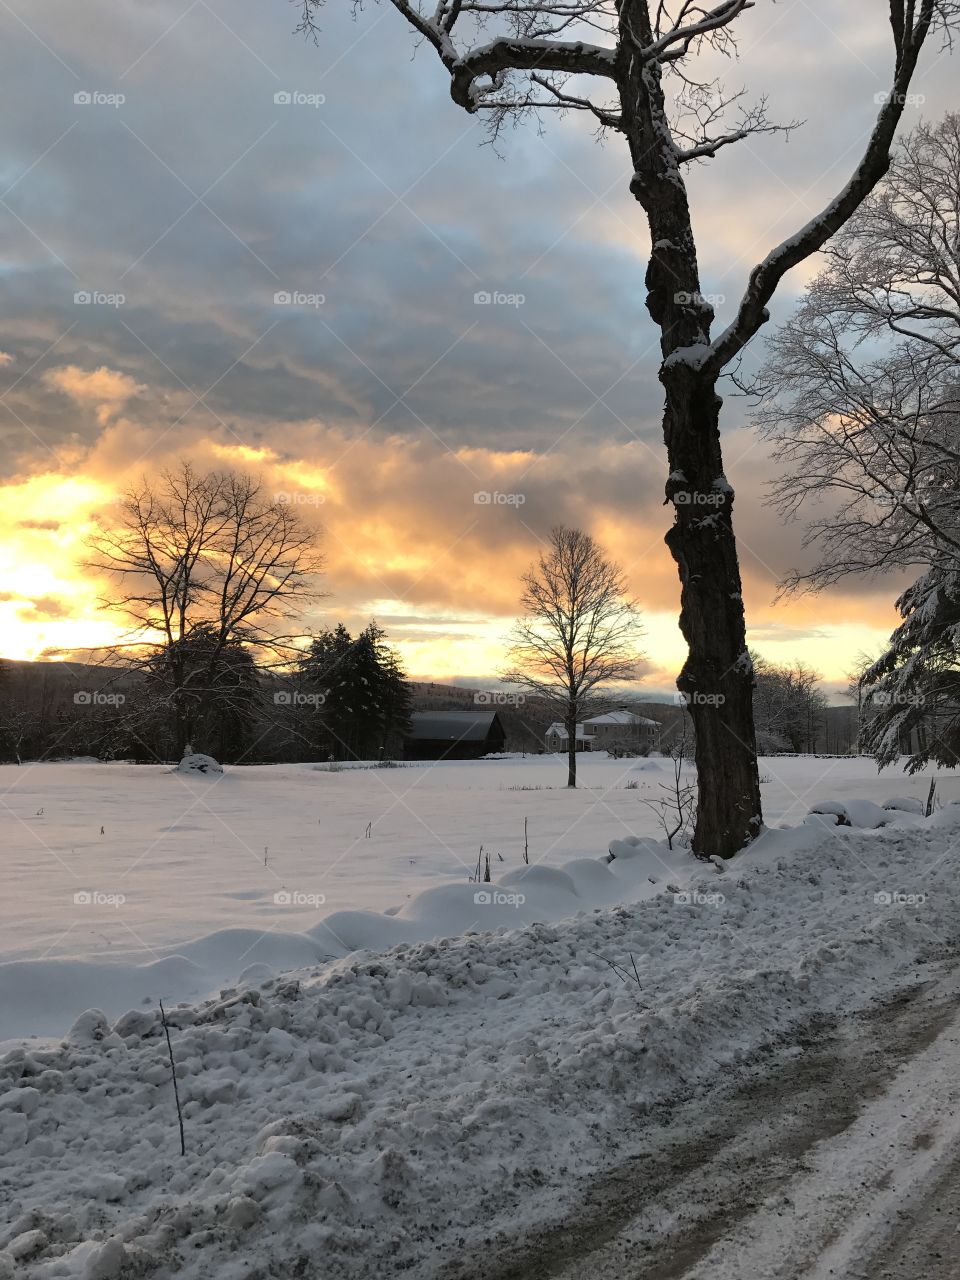 View of snowy landscape at sunset